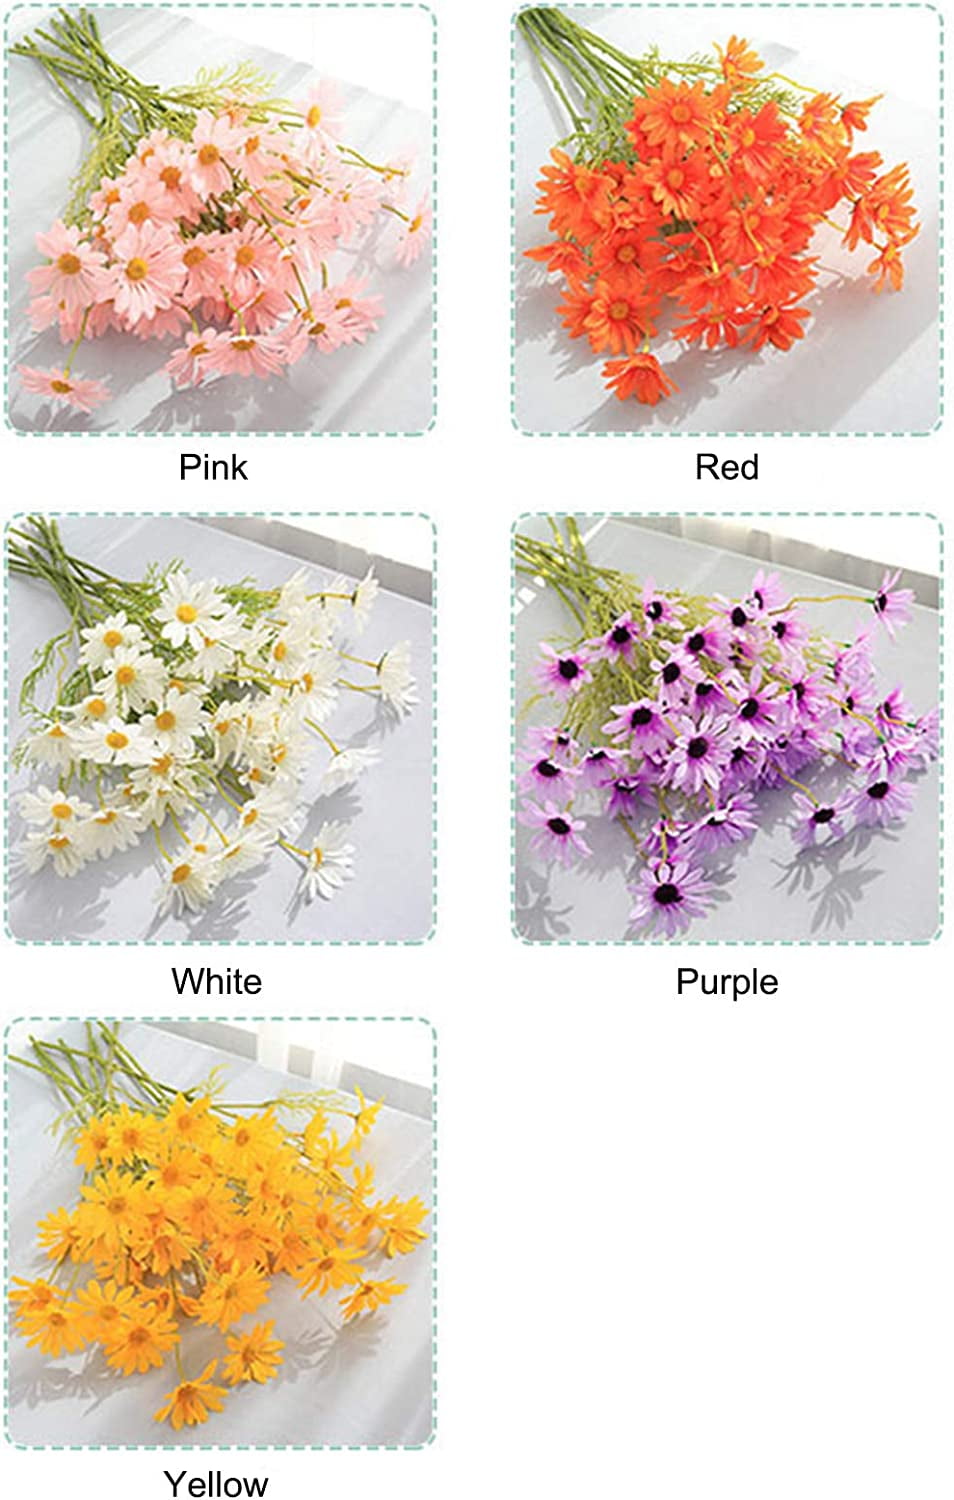  Framendino, 100 Pack Small Fake Flowers for Crafts Multicolor  Mini Silk Daisy Flower Heads for Wedding Home Decor DIY Scrapbooking  Garland Wreath Making : Home & Kitchen